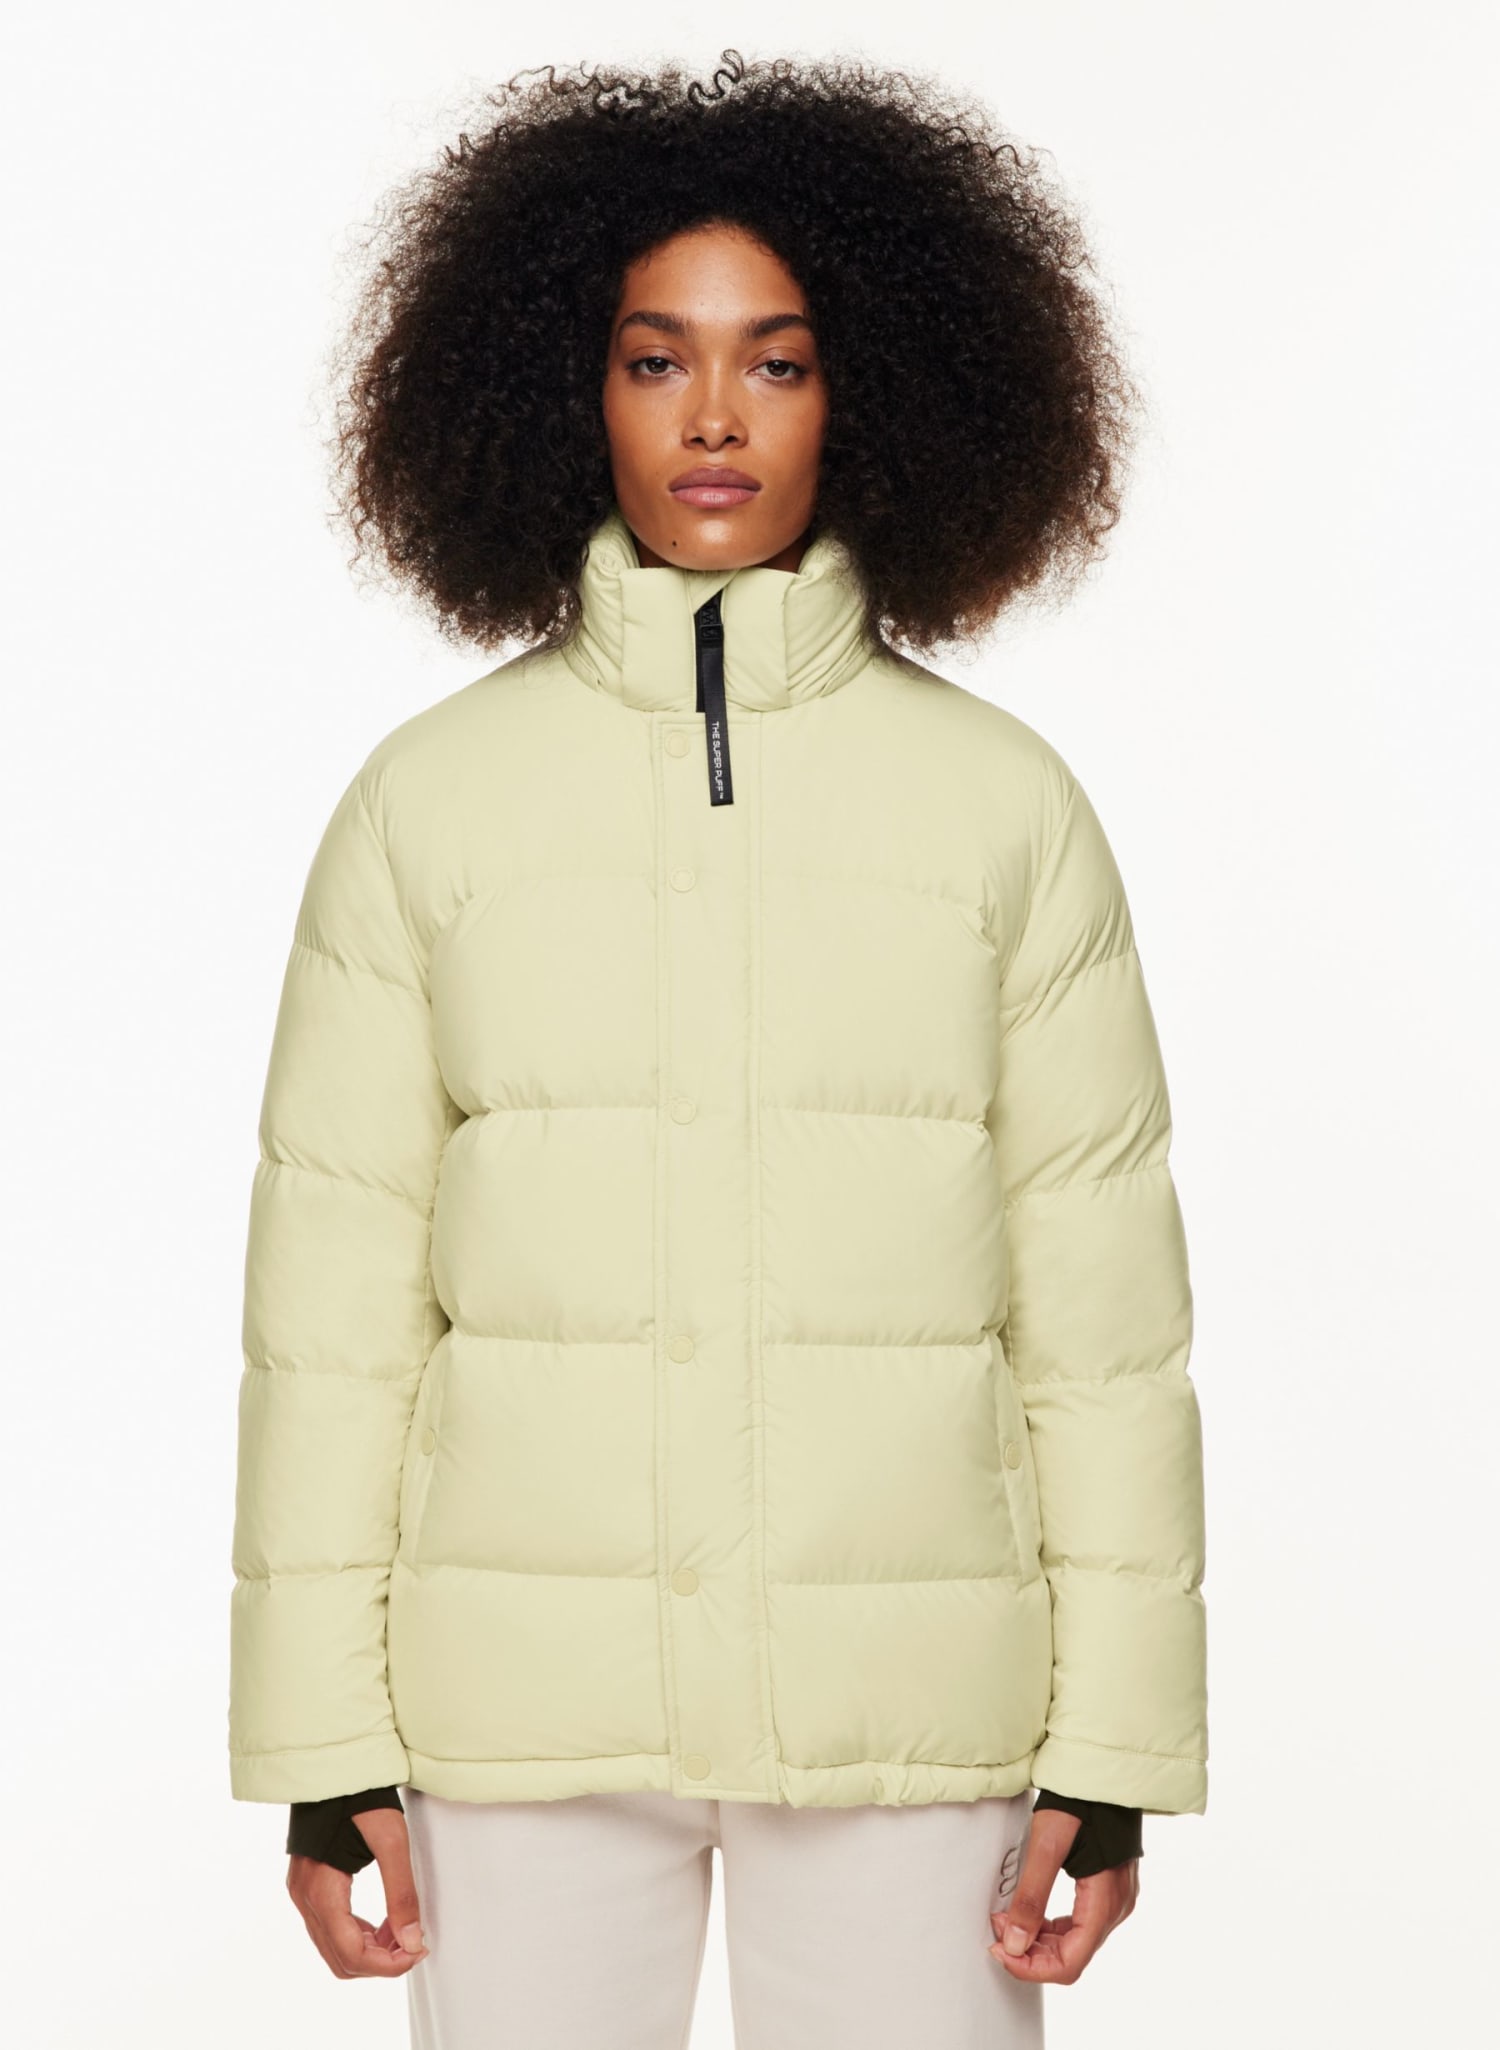 14 best puffer jackets, plus what to look for in one